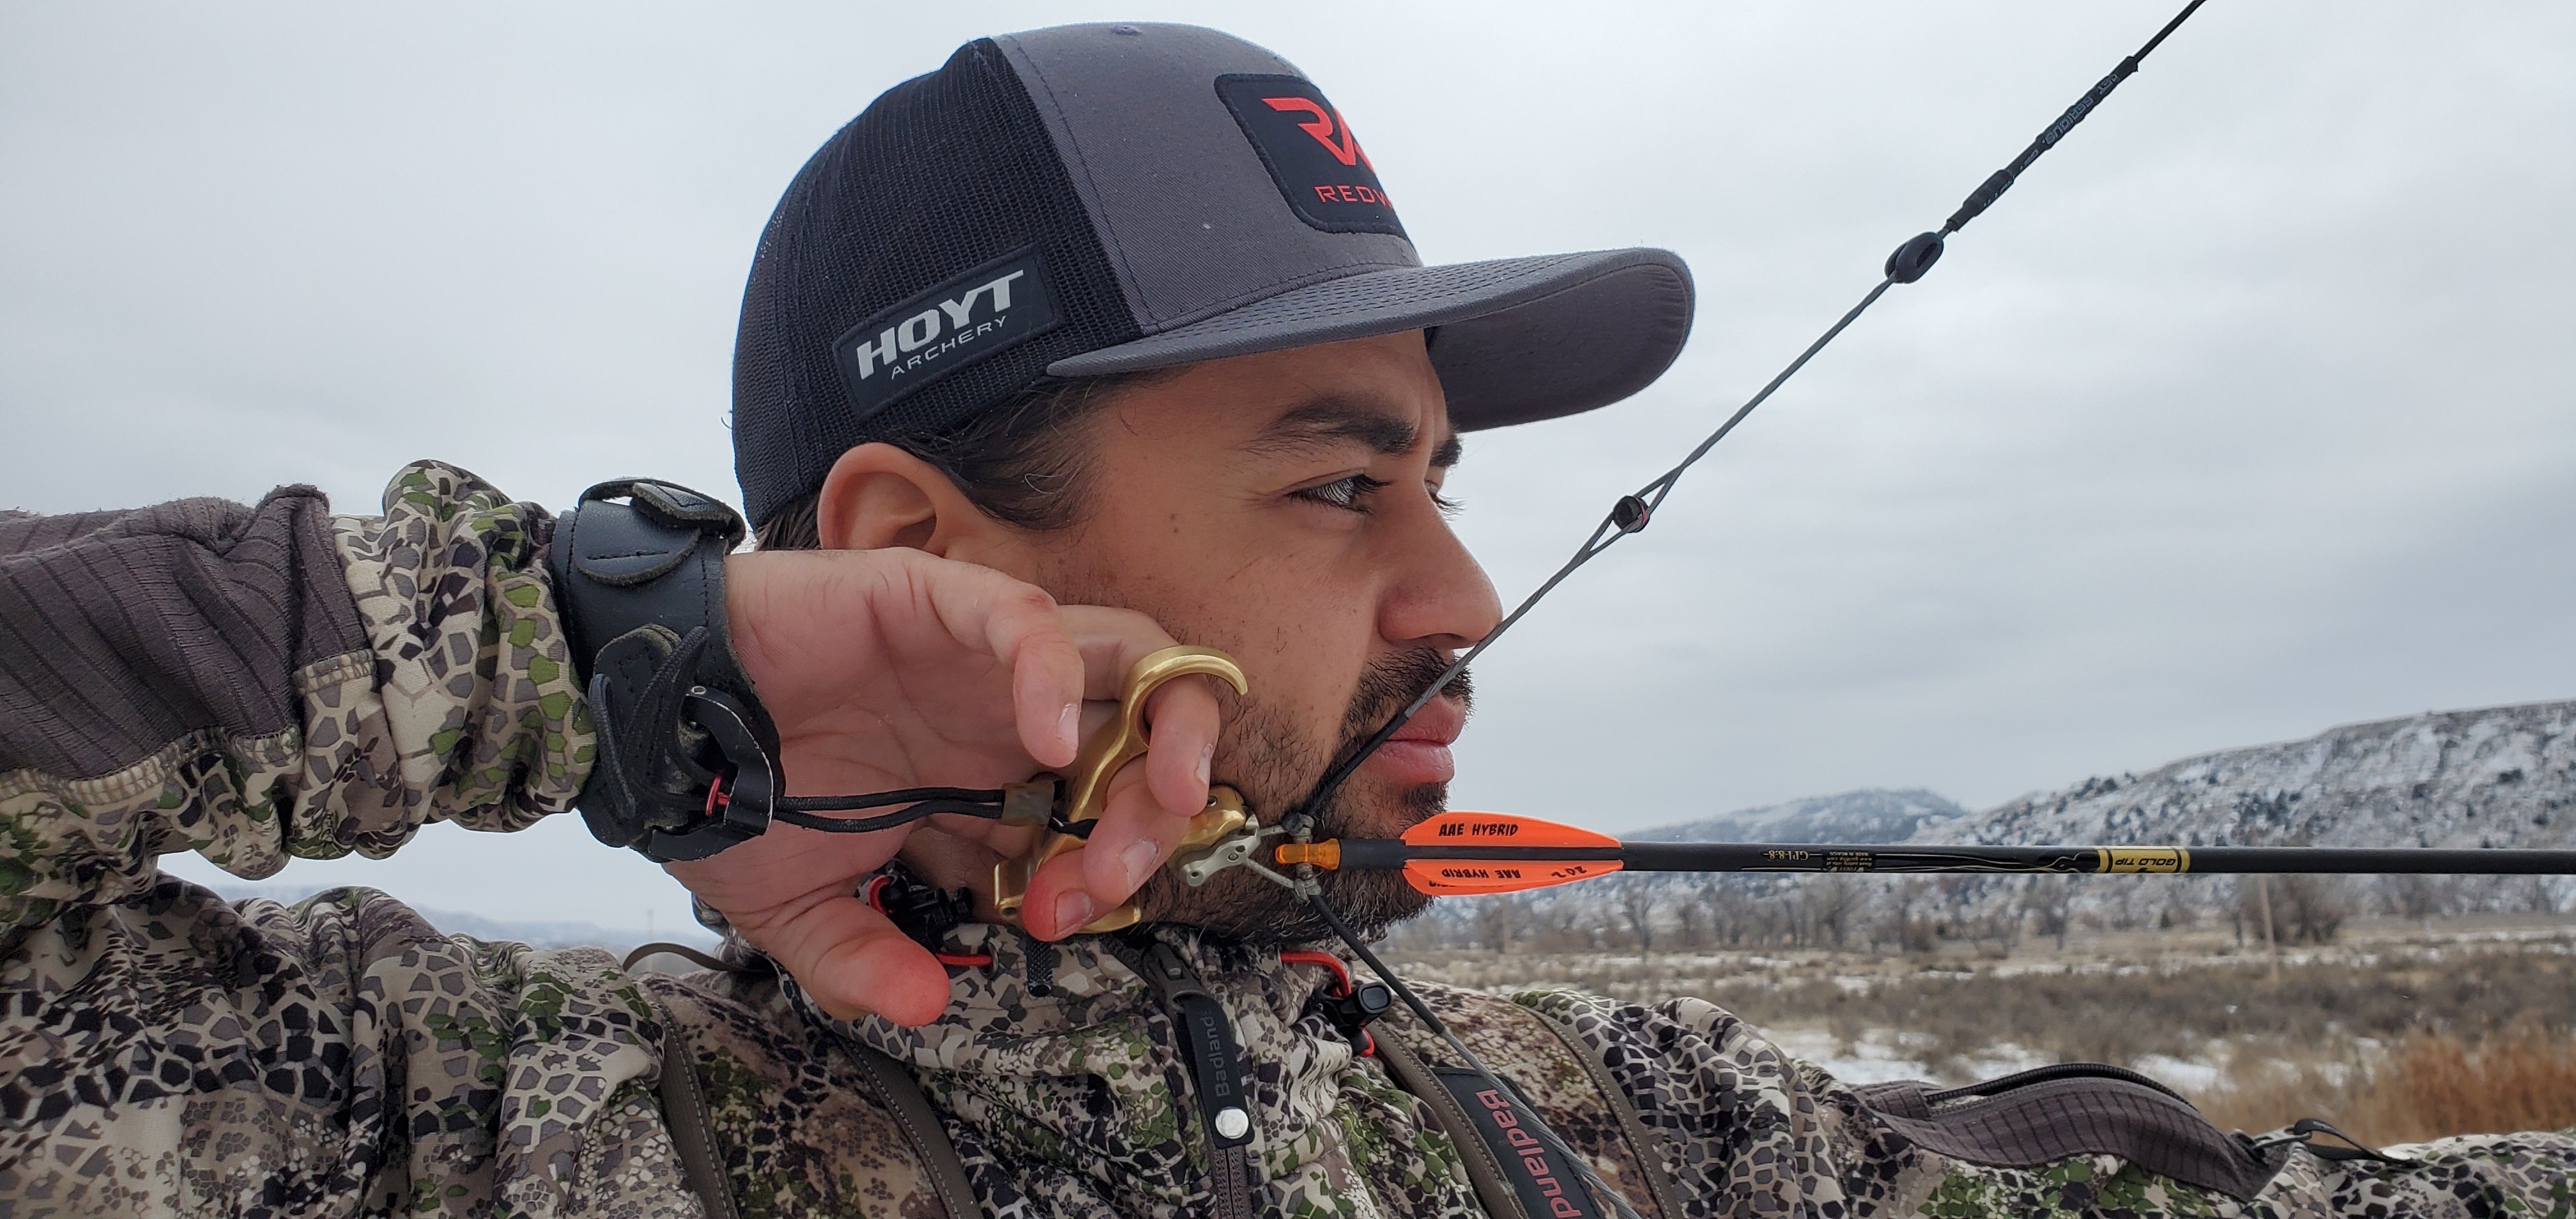 
Shoot Your Way to Better Bowhunting